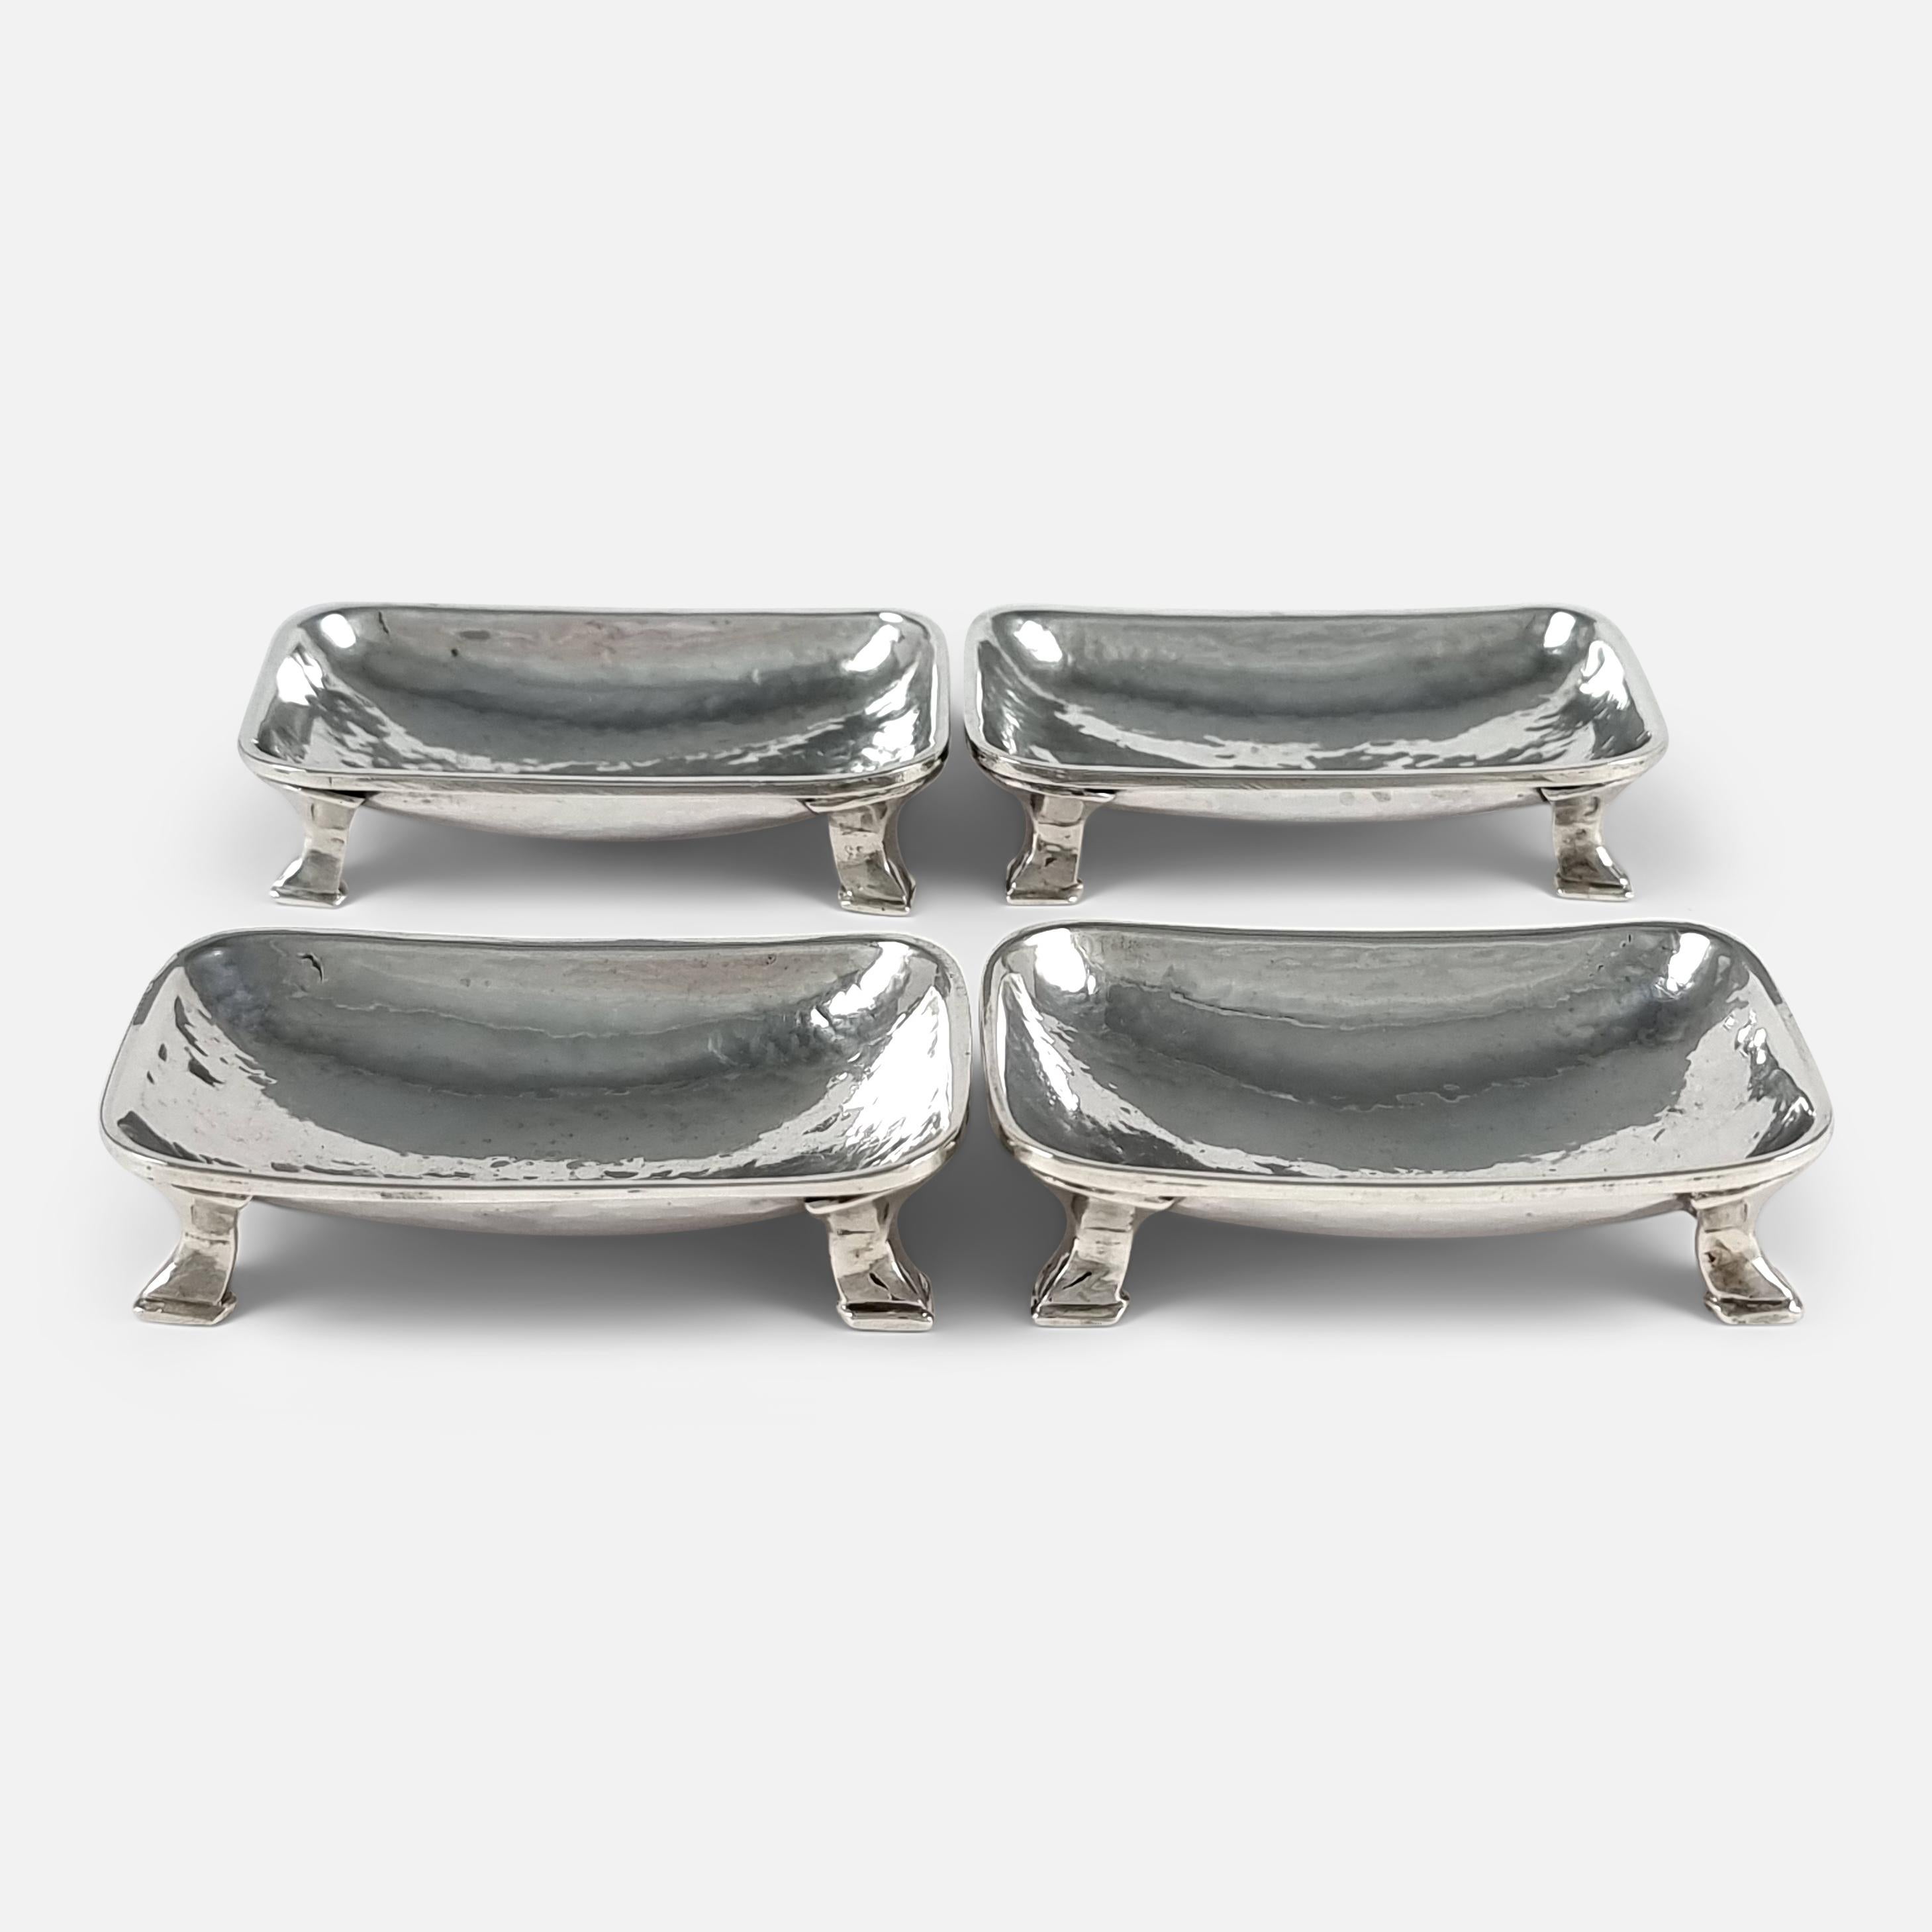 A set of 4 Arts and Crafts sterling silver salts by Omar Ramsden, 1935. The salts are of rectangular outline, the hammered silver bowls raised on four swept feet. They are stored in the original wooden case, the inside of the hinged cover written on